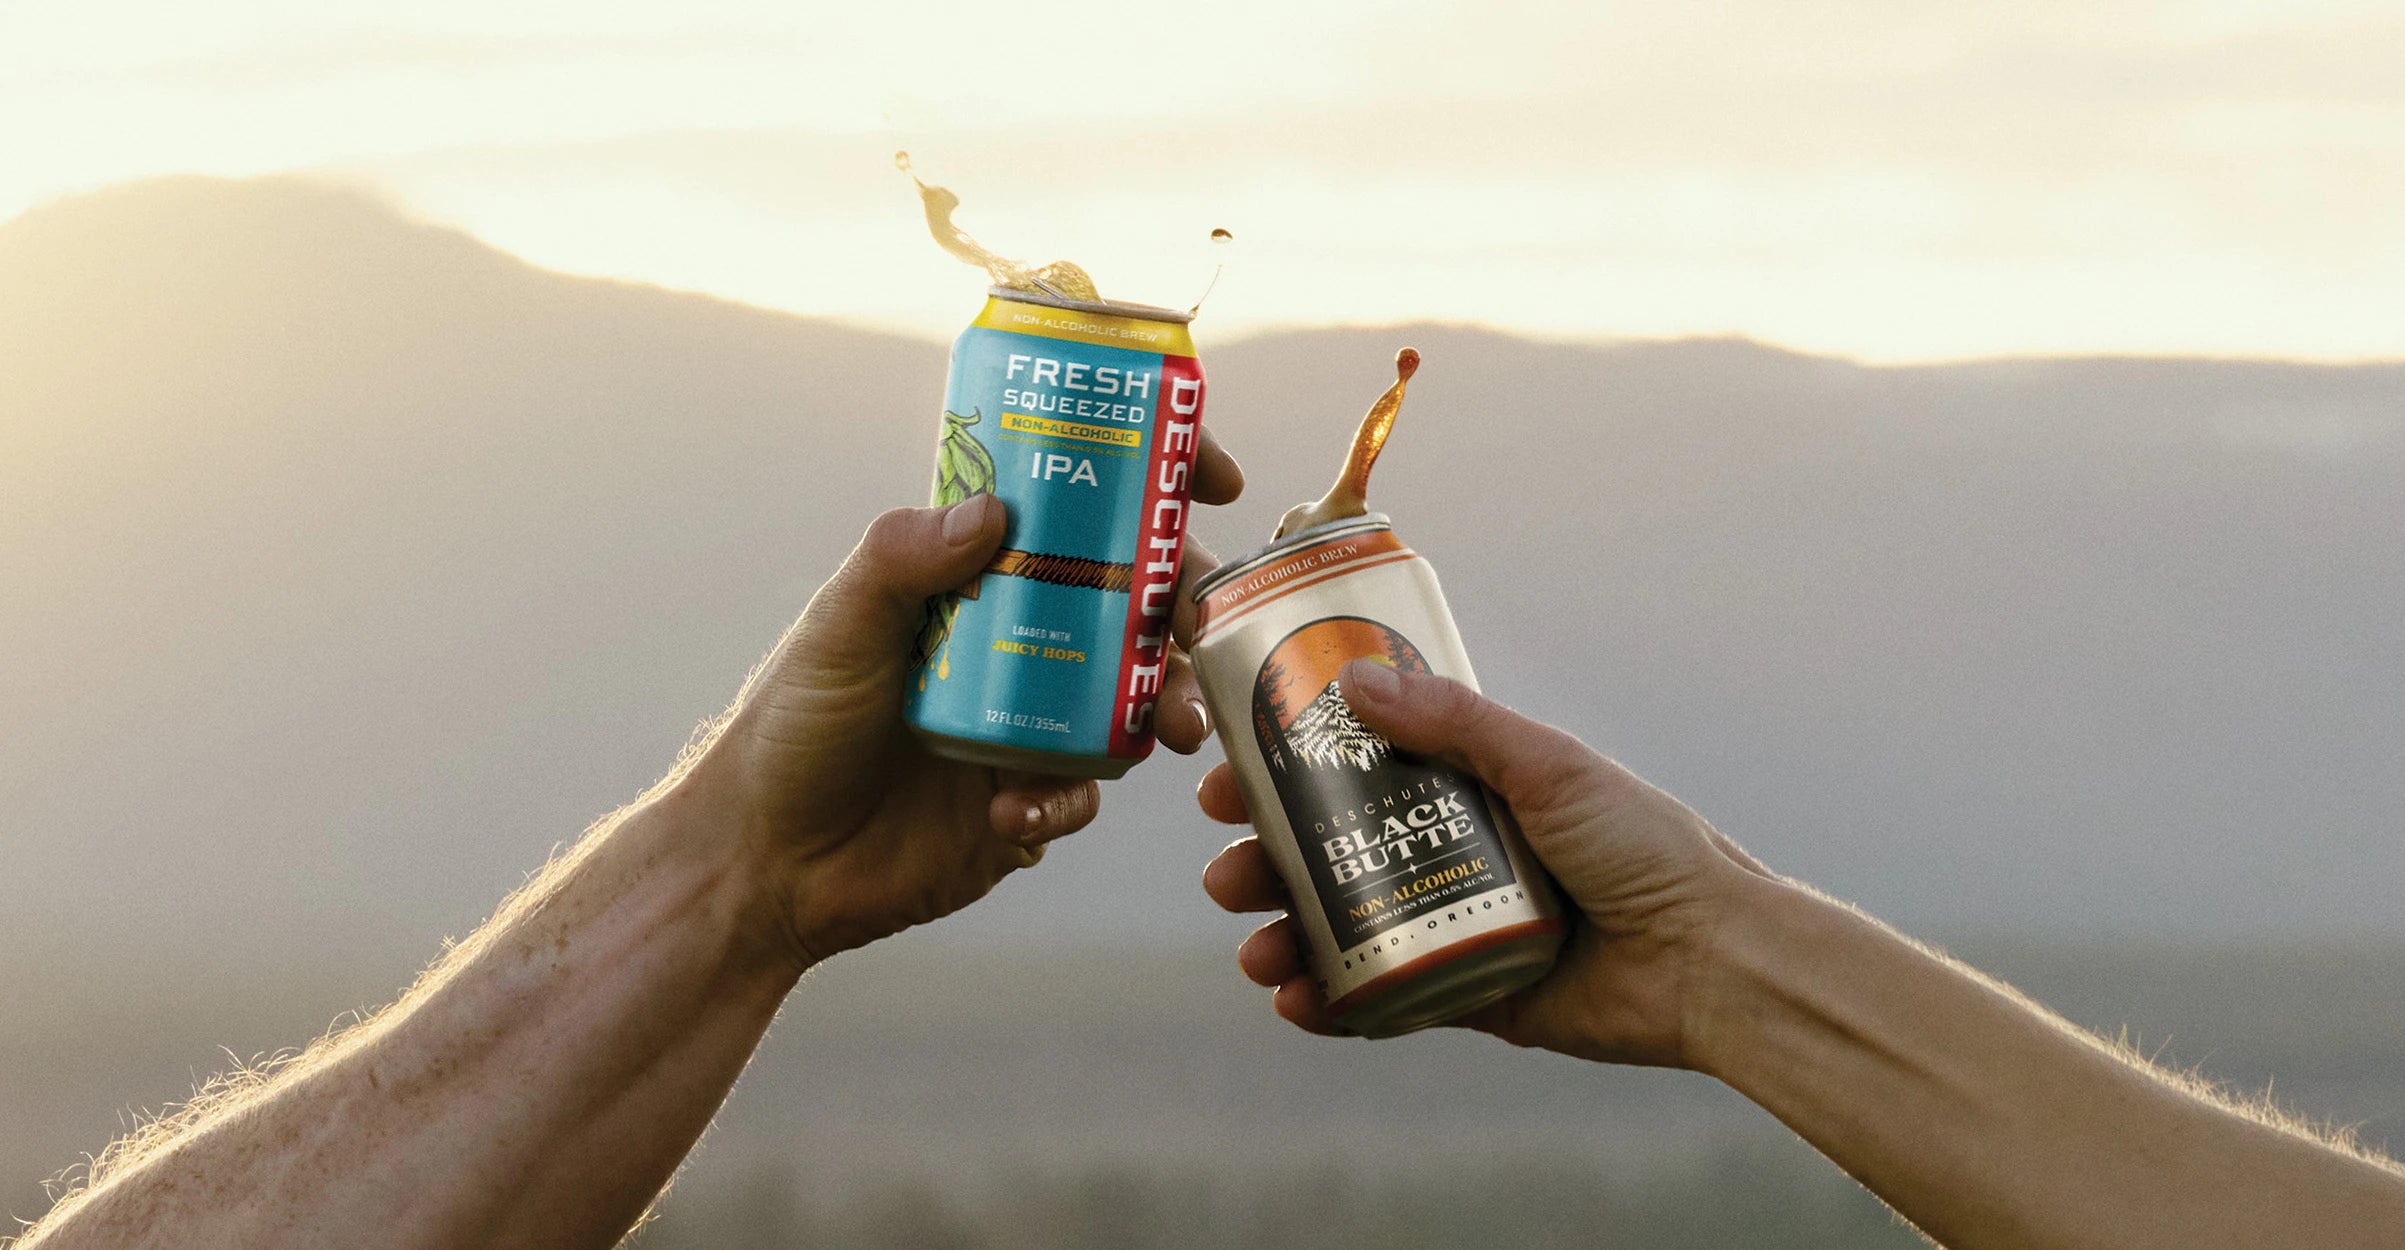 Two hands tapping cans of Fresh Squeezed Non-Alcoholic IPA and Black Butte Non-Alcoholic together.